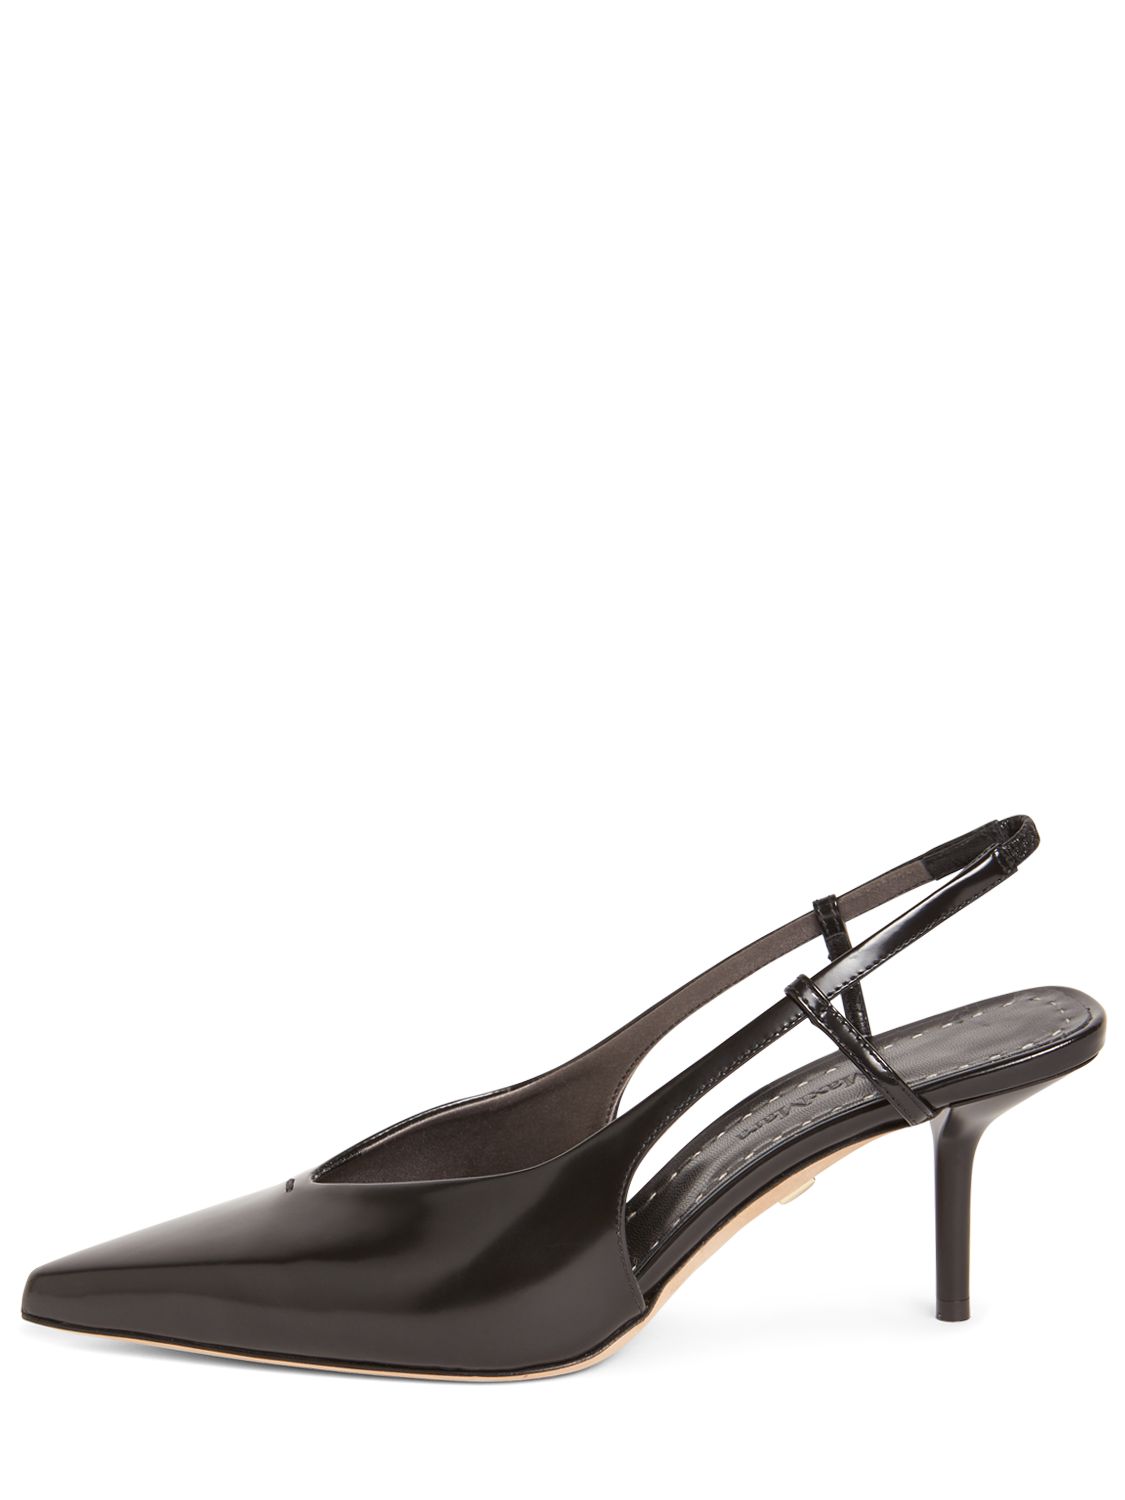 Max Mara Leather Slingback Court Shoes In Black